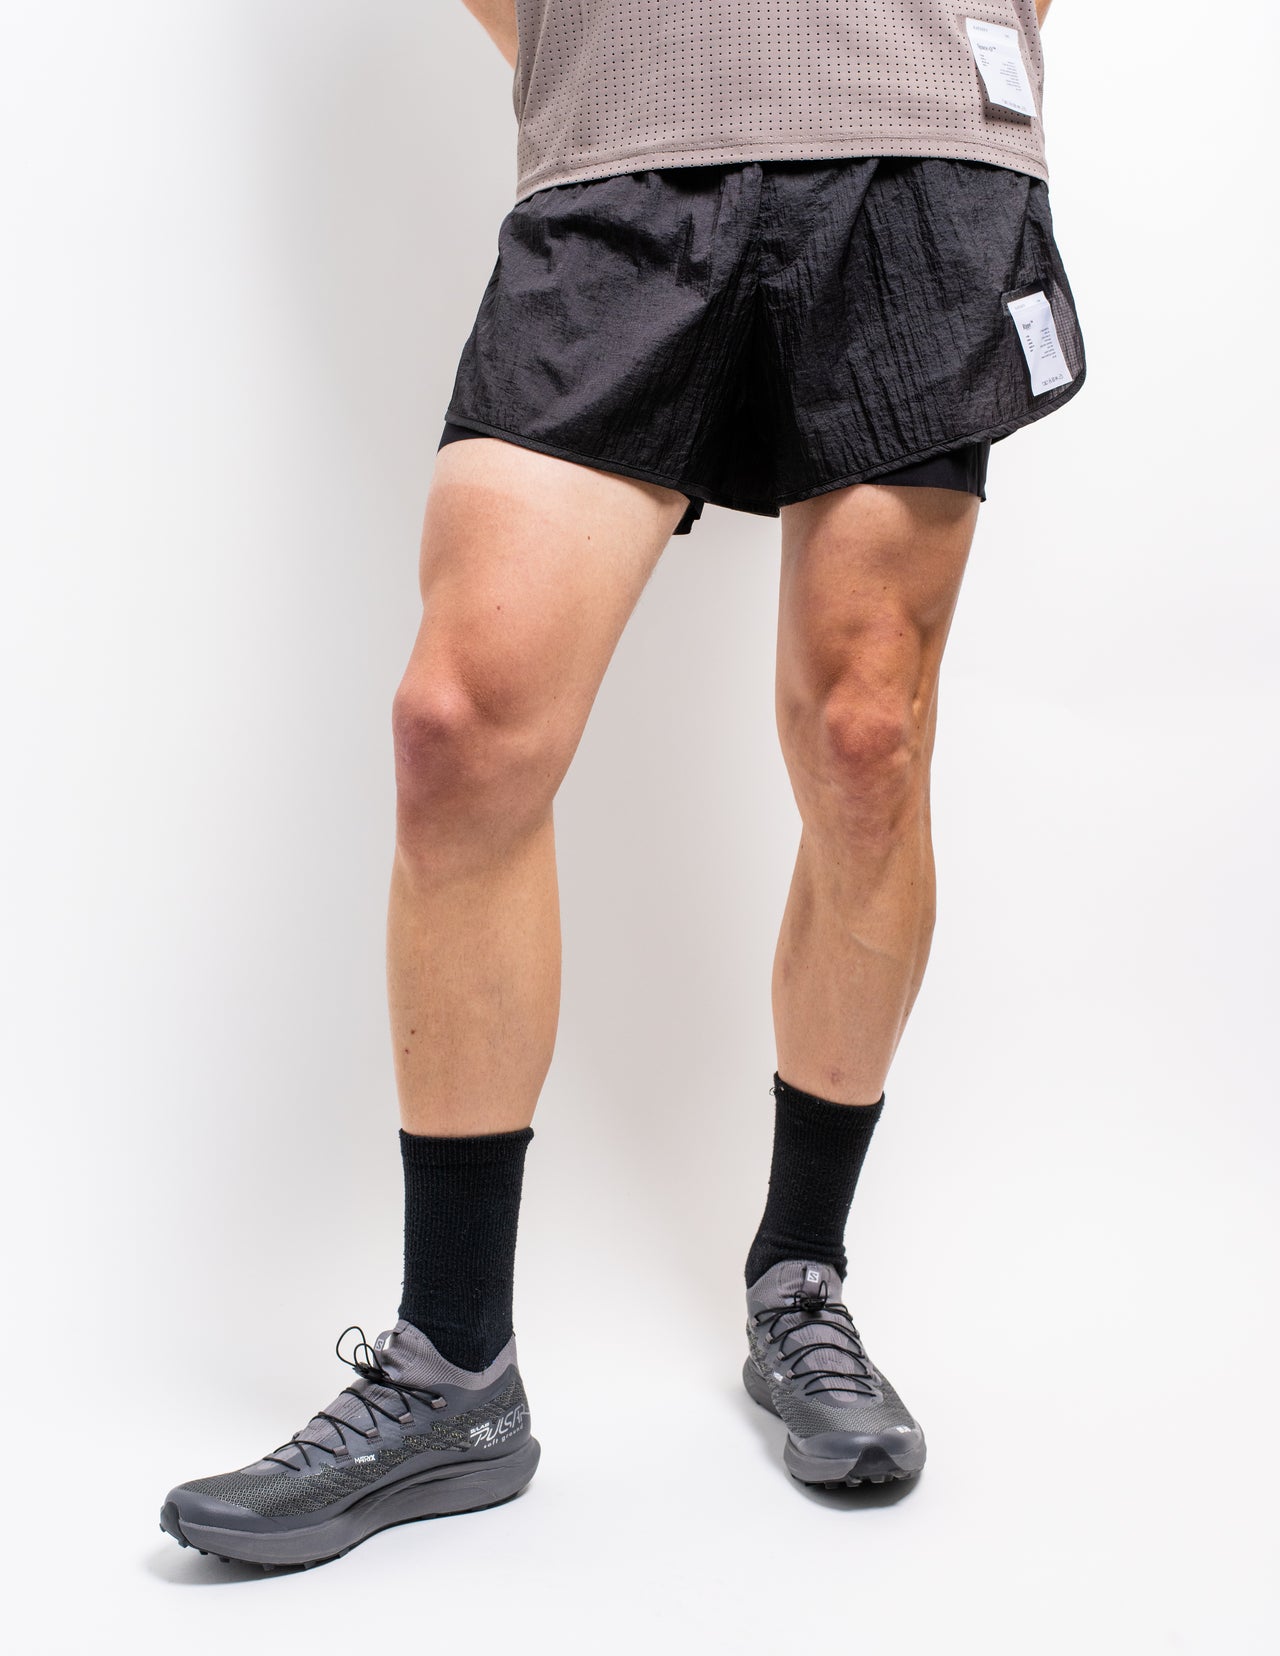 I Tried to Pull Off Bike Shorts and Failed Miserably - PureWow